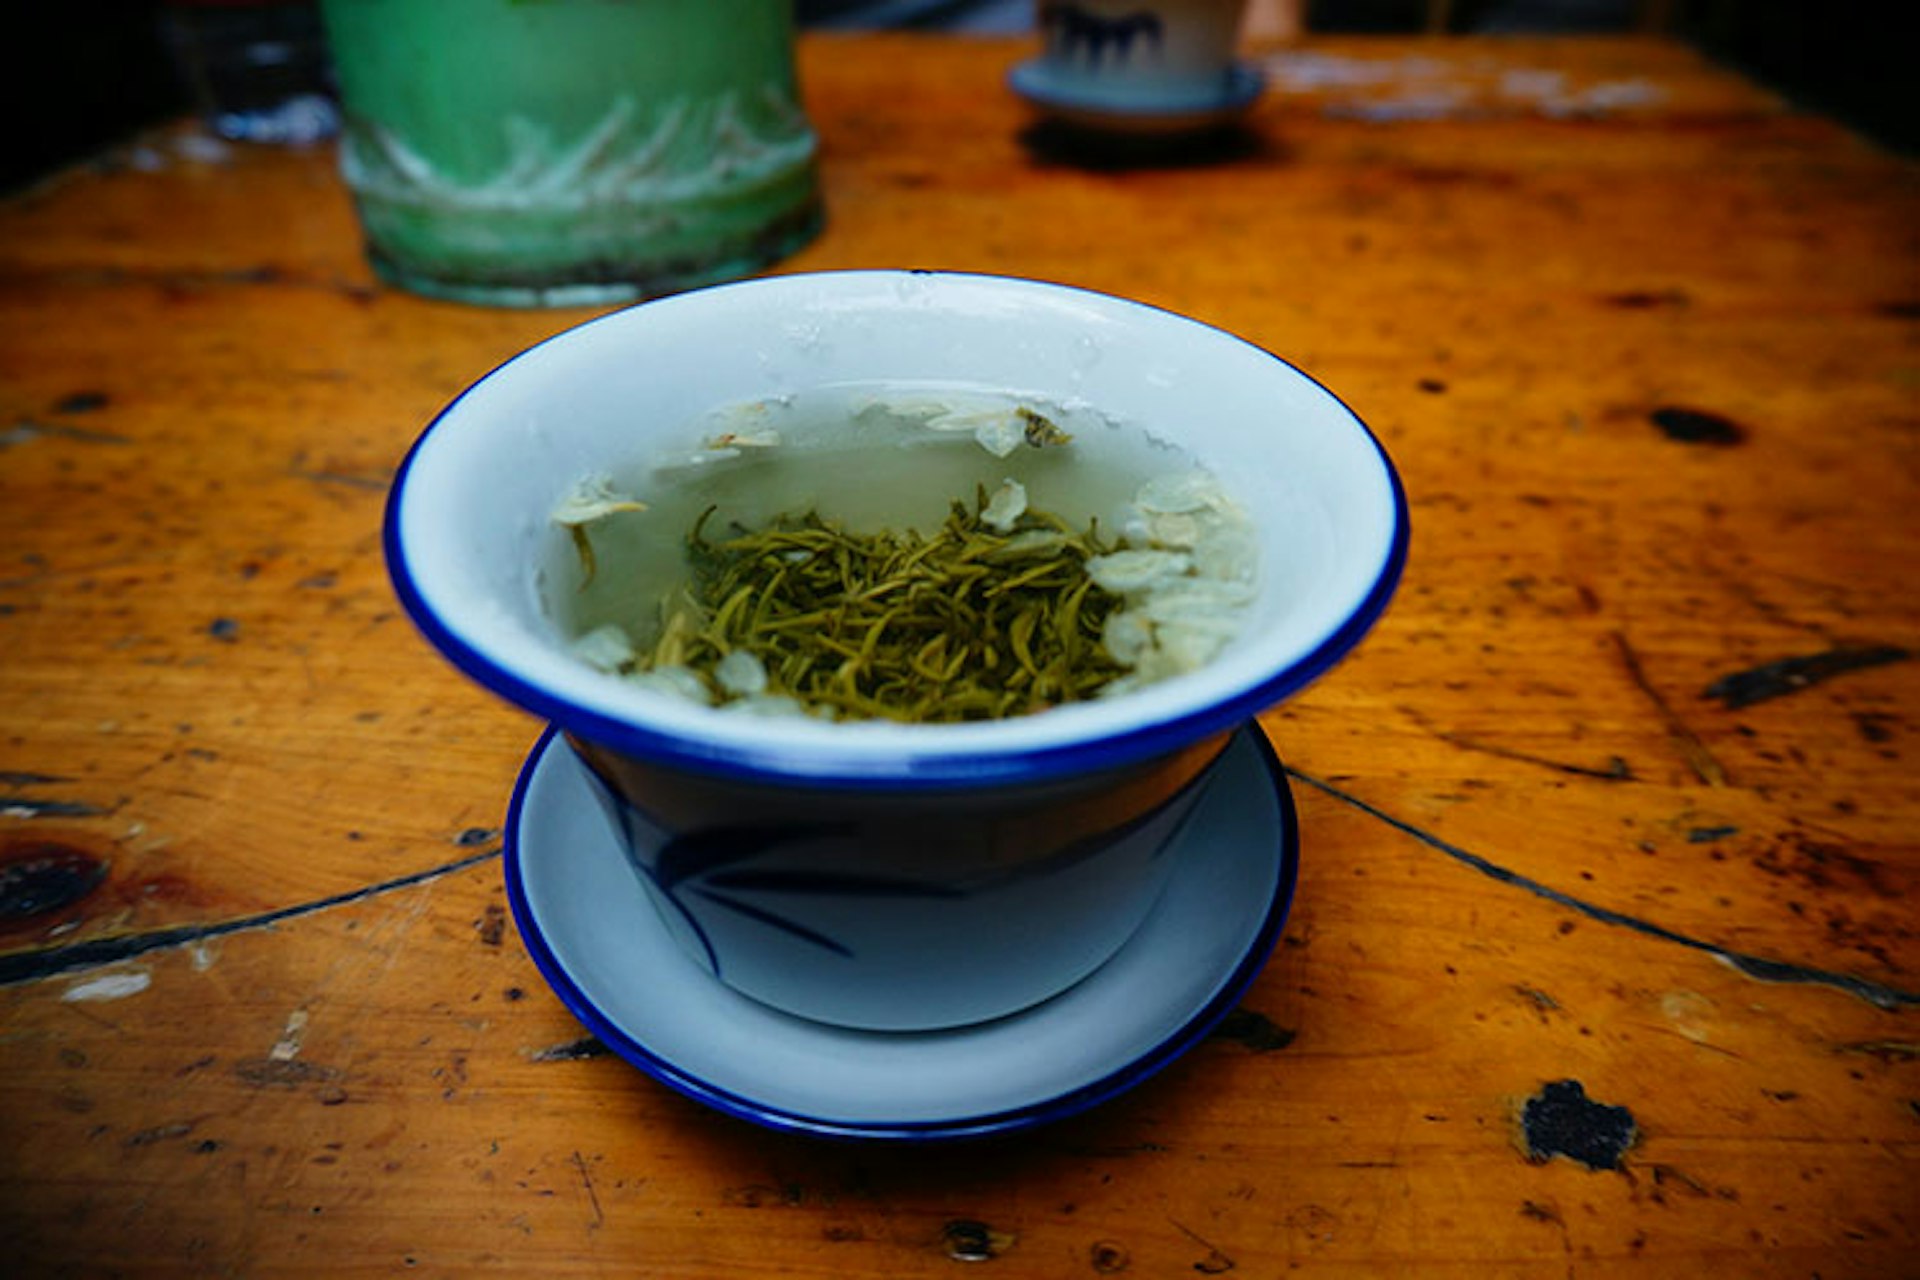 Green tea with jasmine flowers at Heming Teahouse. Image by Andrew Smith / CC BY-SA 2.0